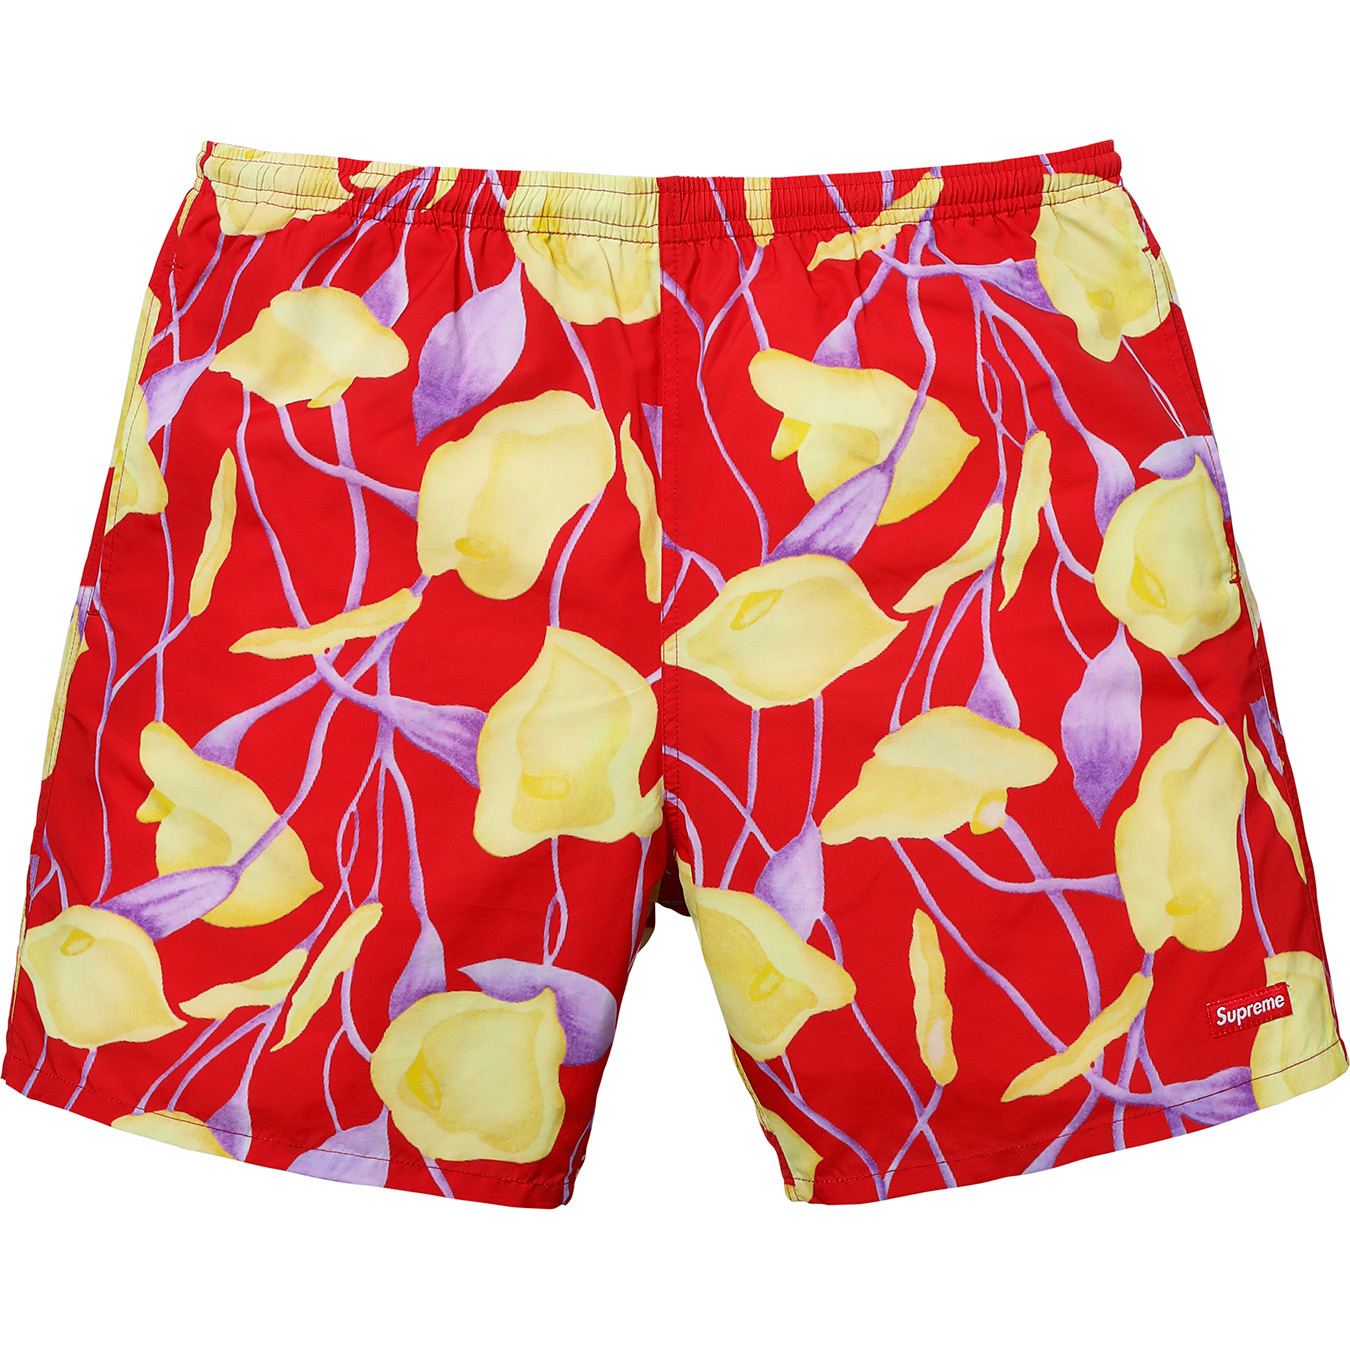 Supreme Nylon Water Short Red Floral - SS18 男士- TW